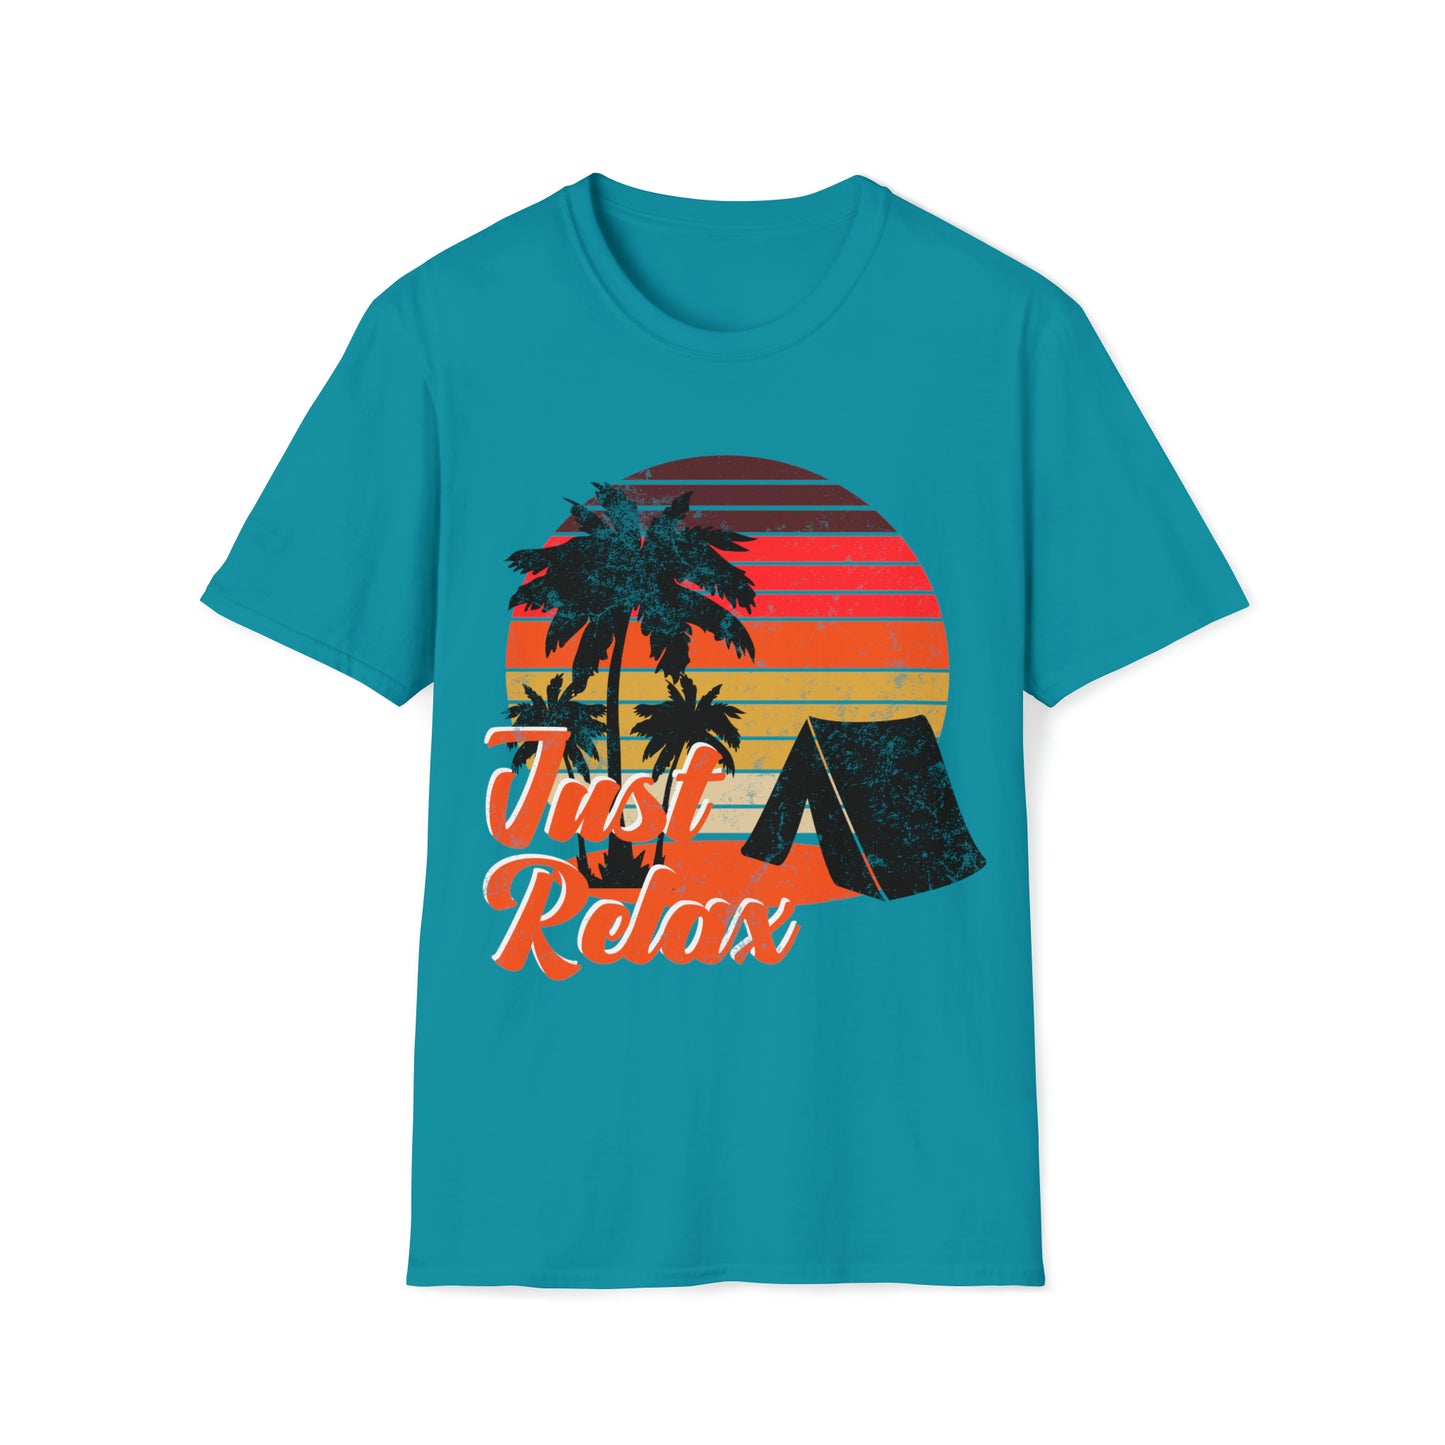 Just Relax Graphic Tee Unisex Softstyle T-Shirt